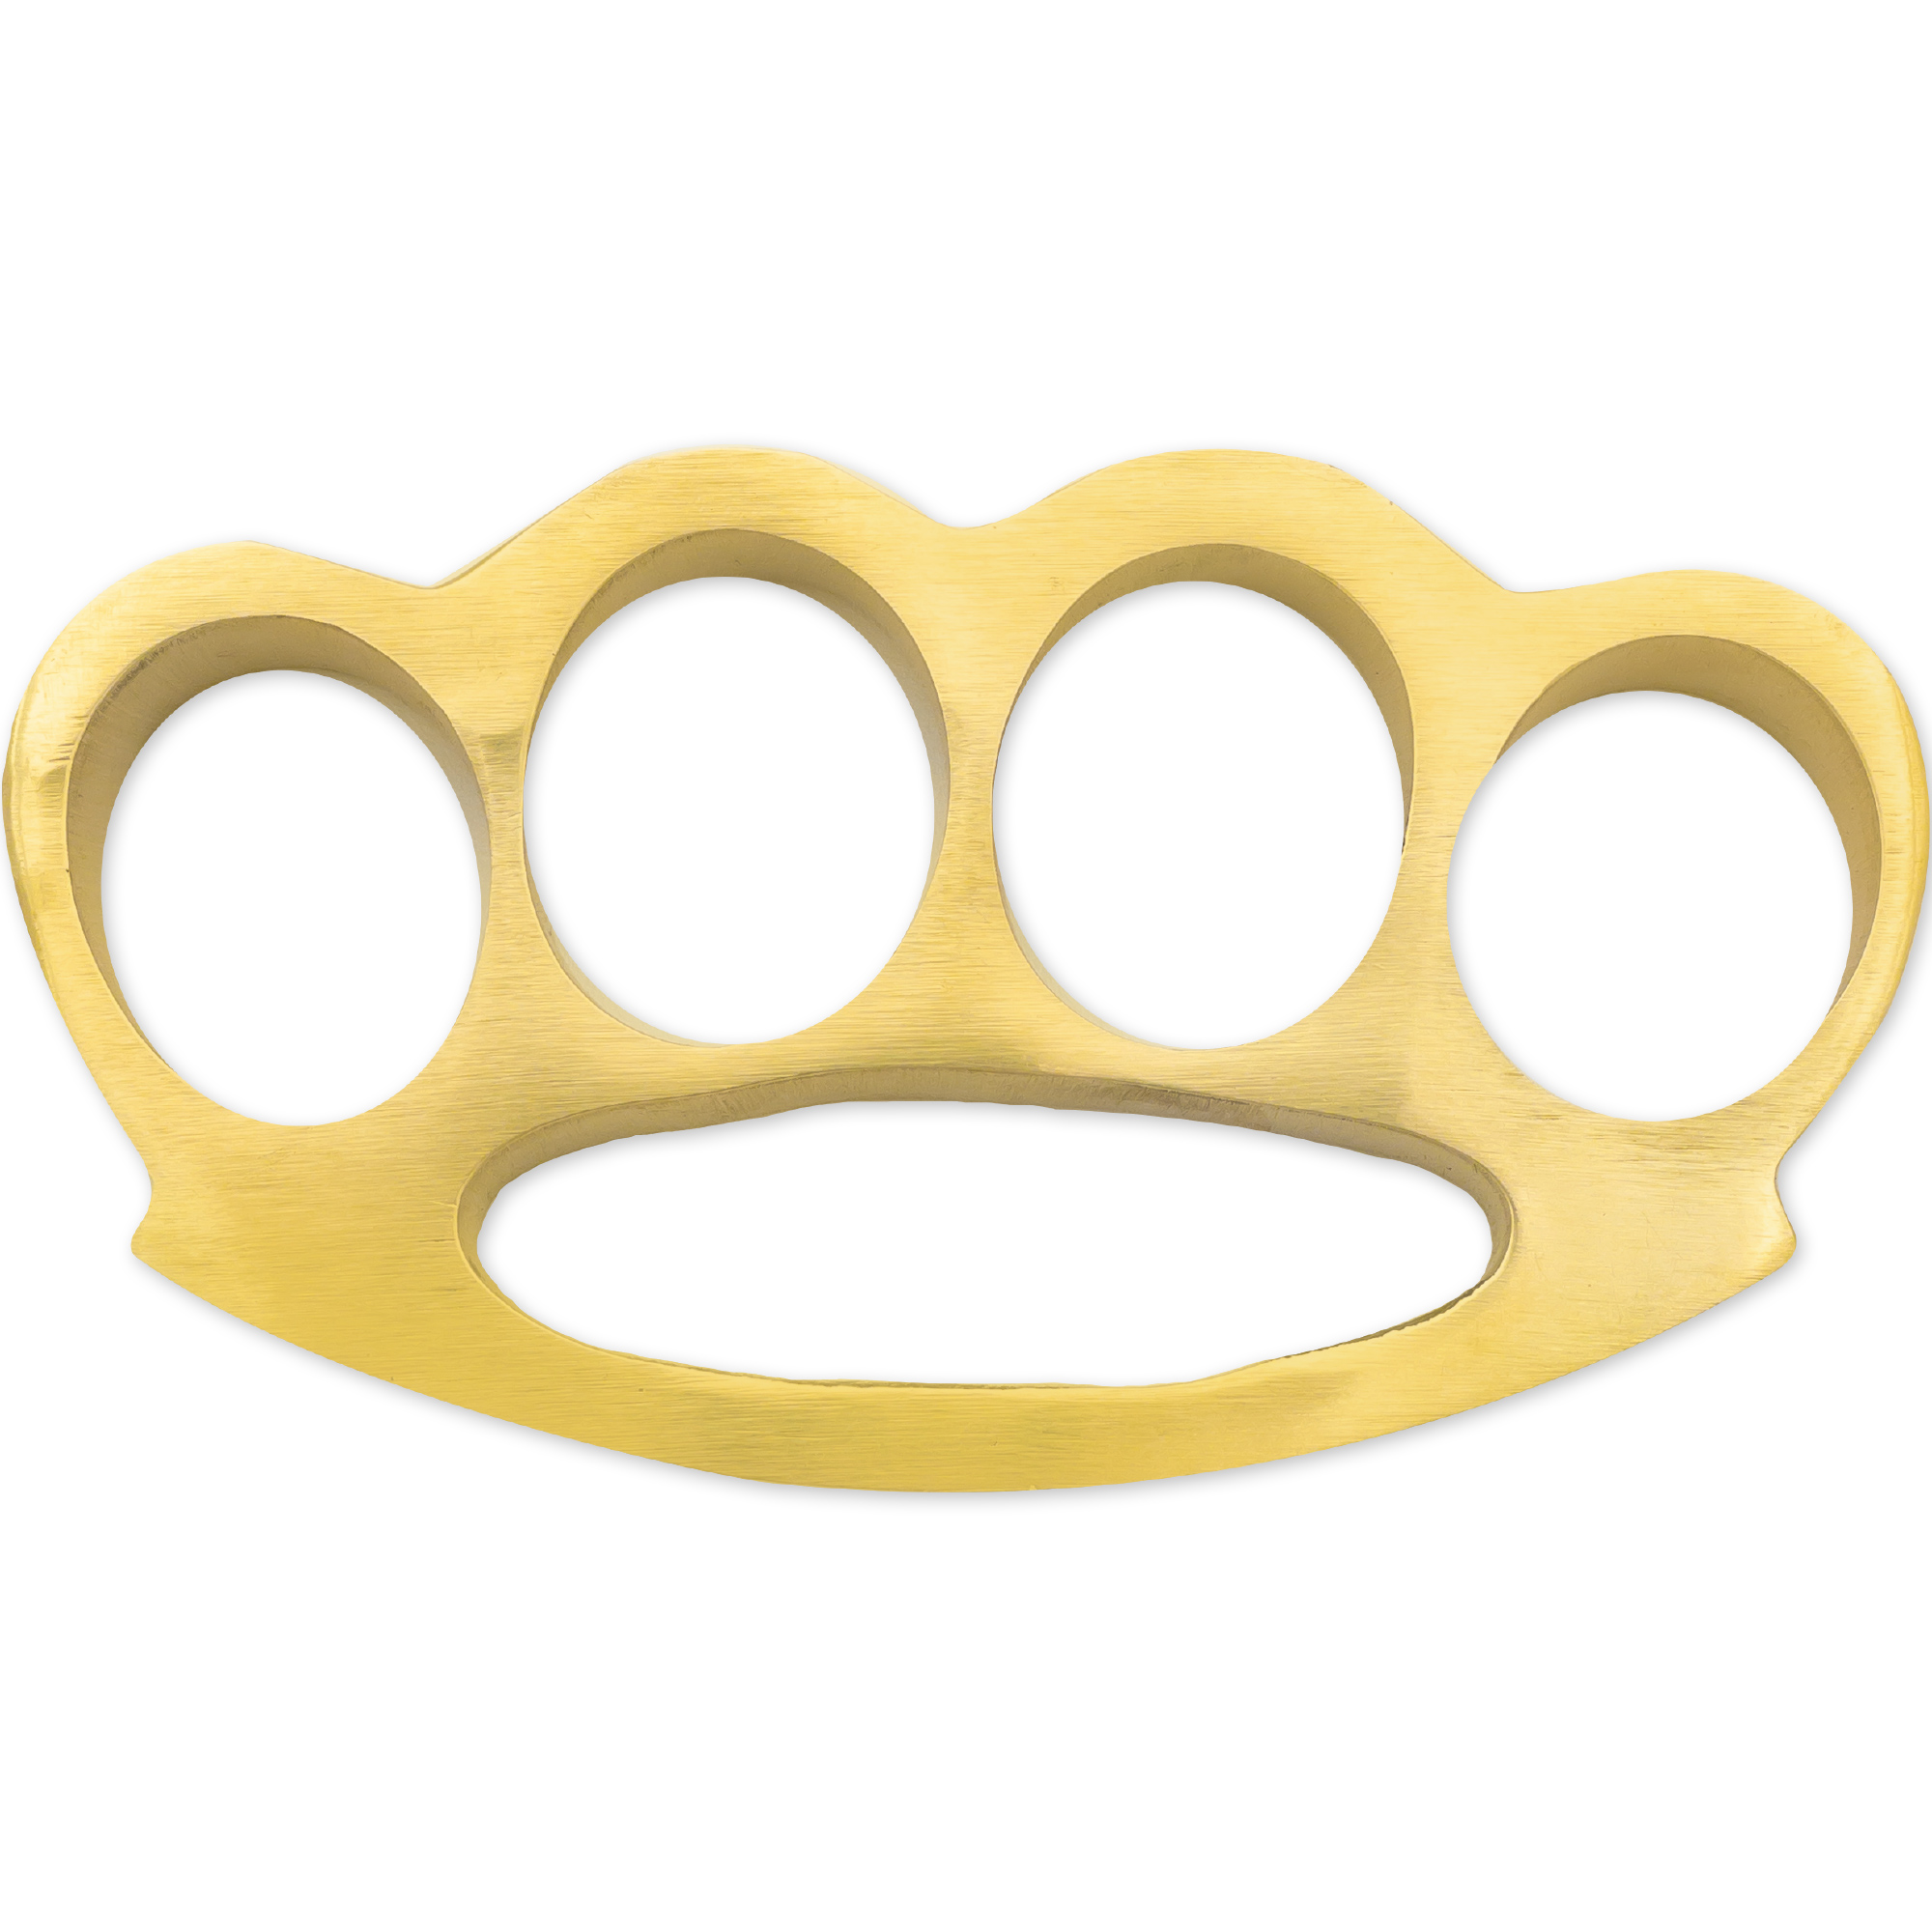 Flash of GOLD 100% Pure Brass Knuckle Paper Weight Accessory